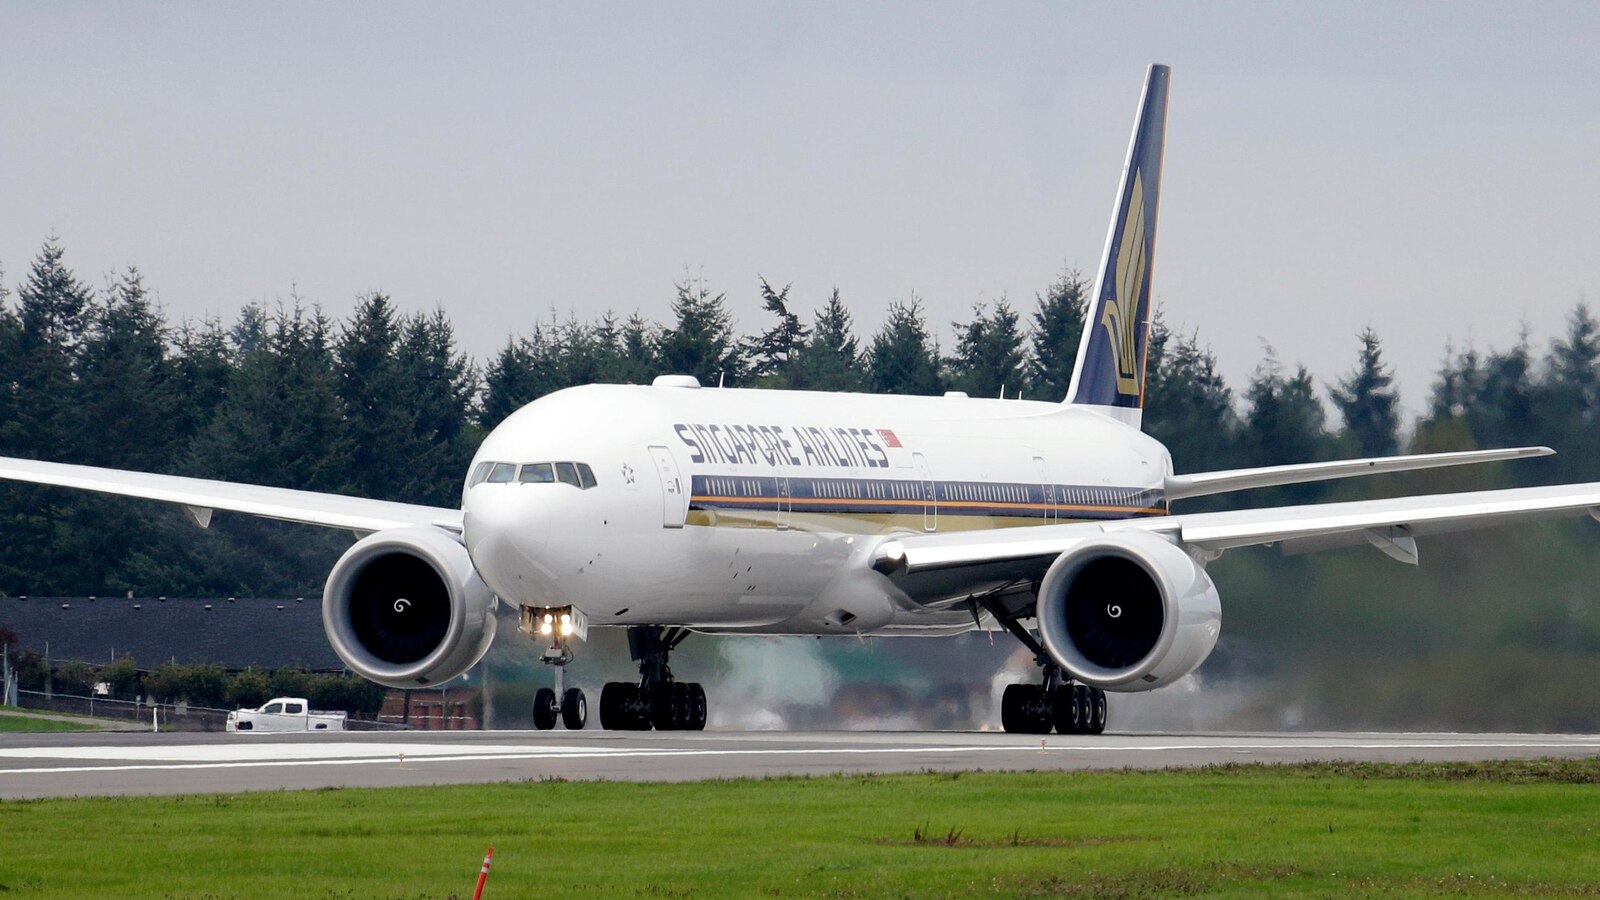 One person died and others were injured after the London-Singapore flight was hit by severe turbulence, Singapore Airlines said